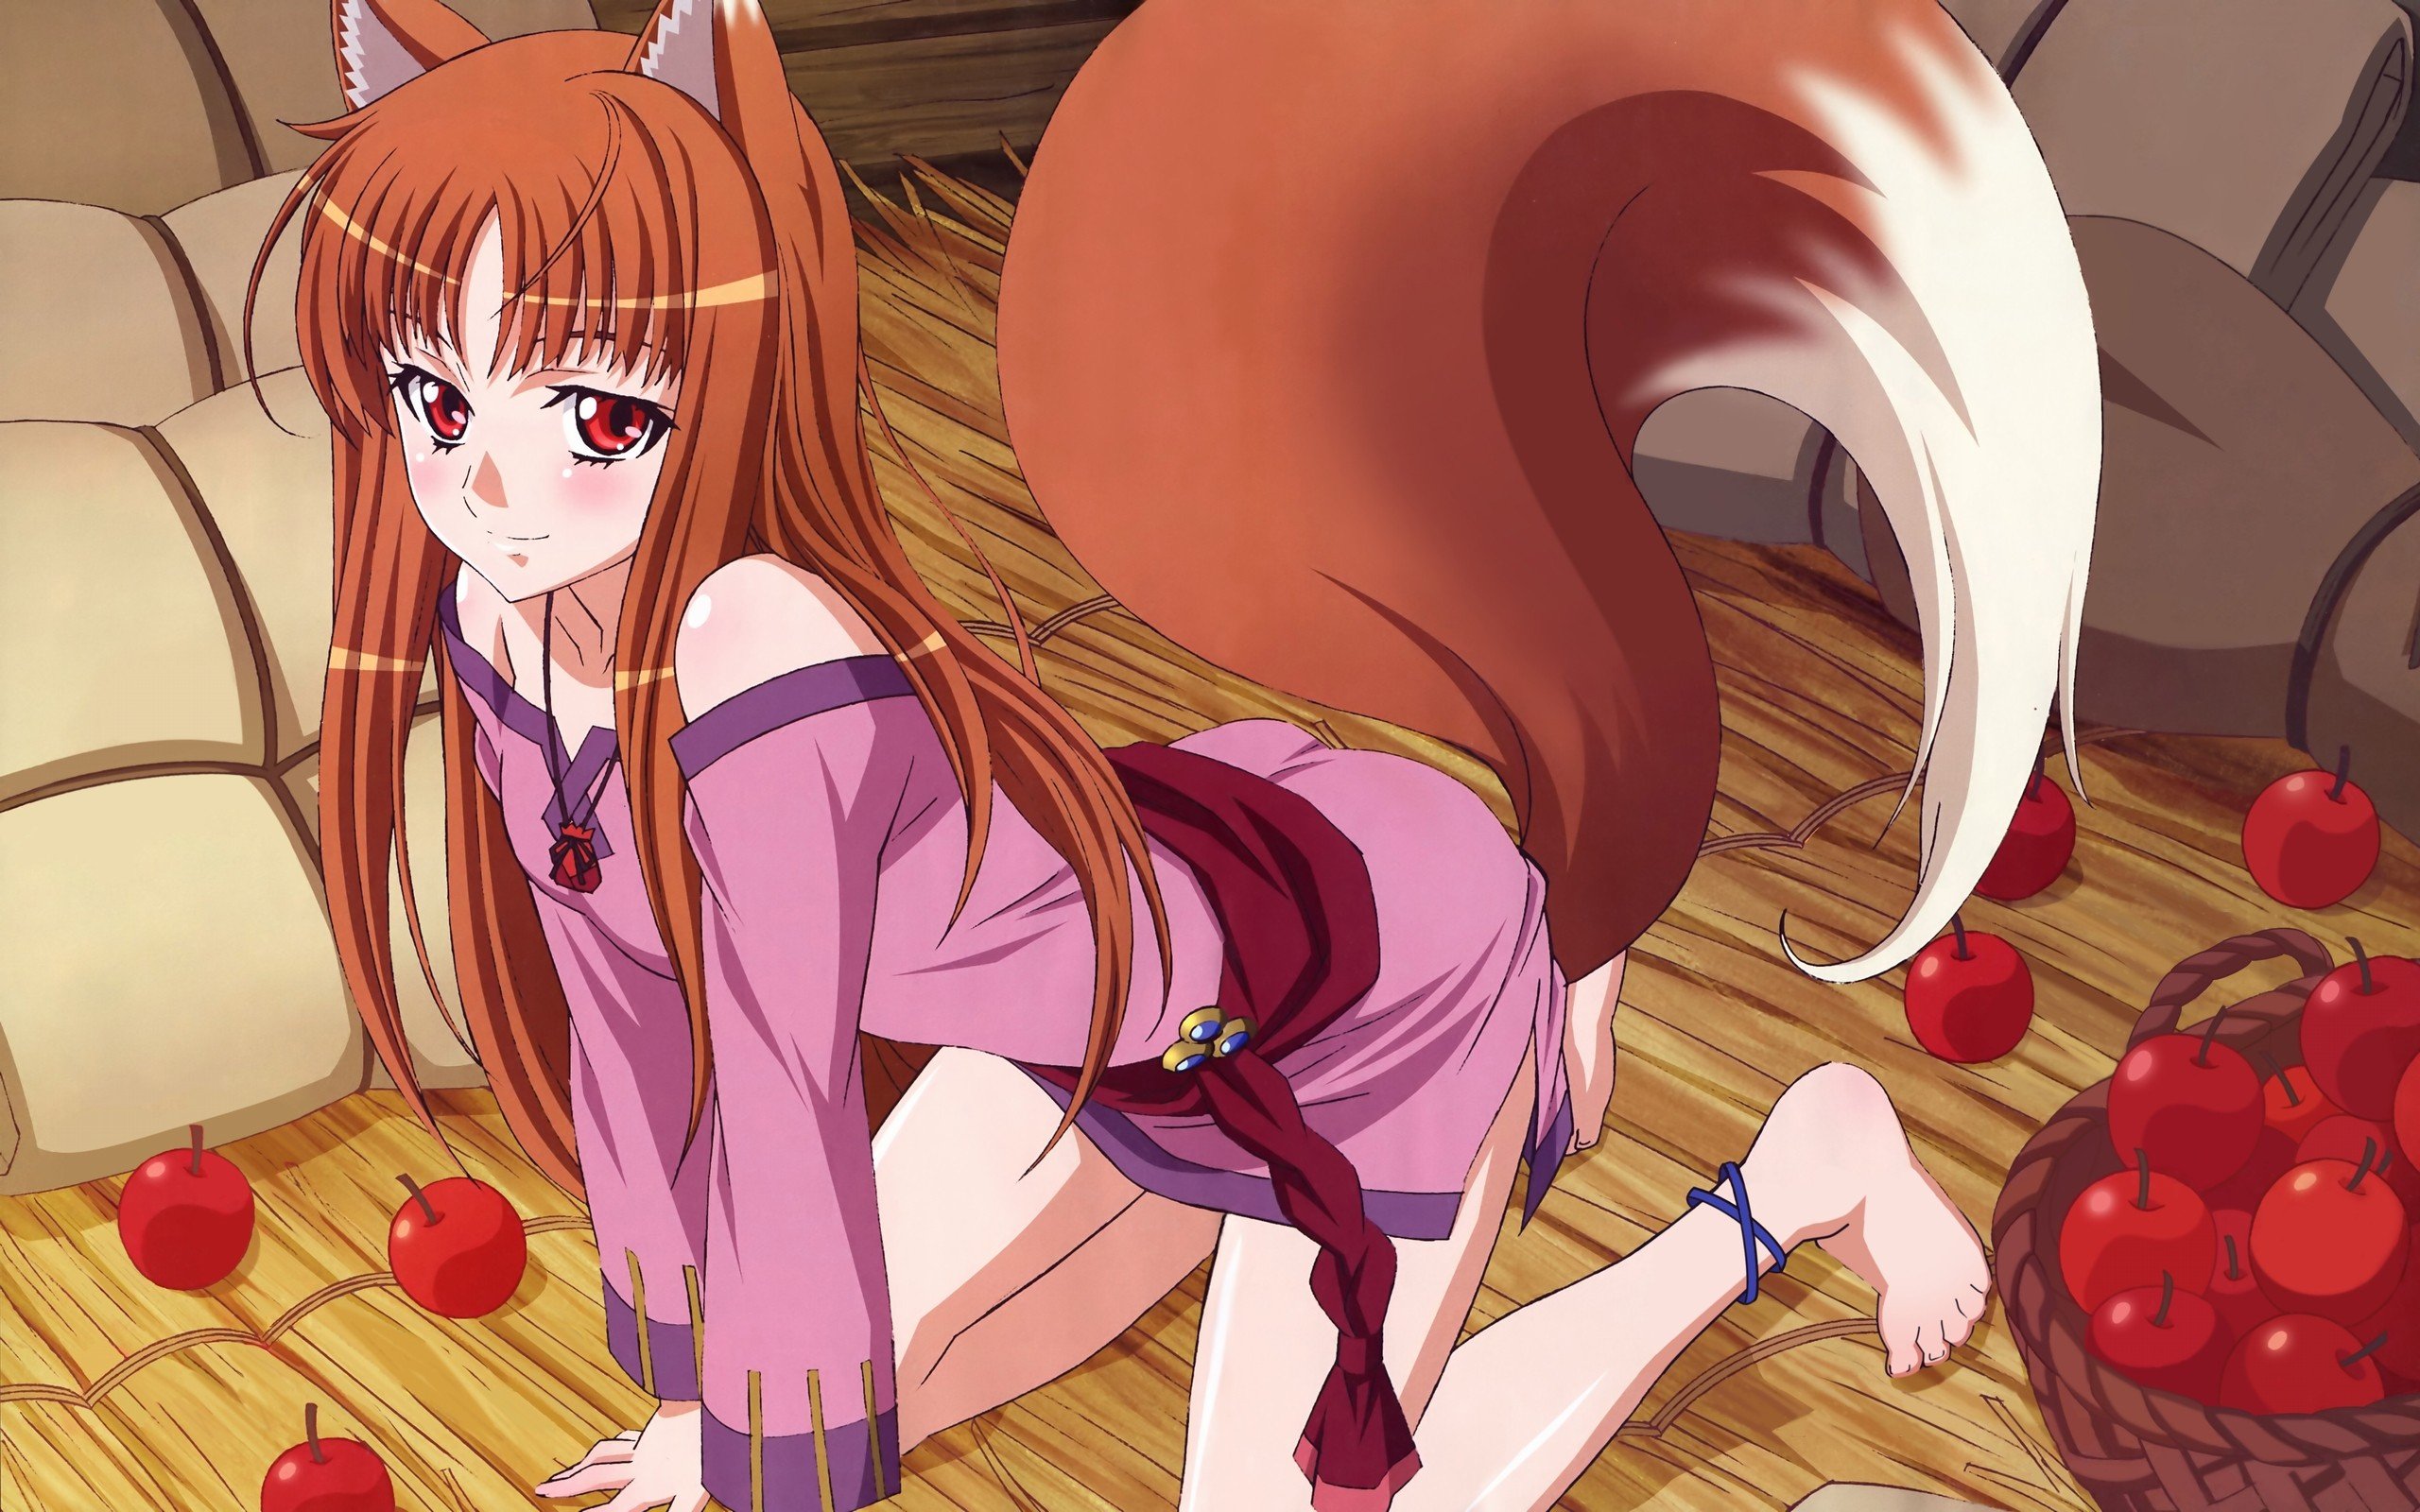 Spice and Wolf, Holo, Apples, Anime girls, Anime Wallpaper